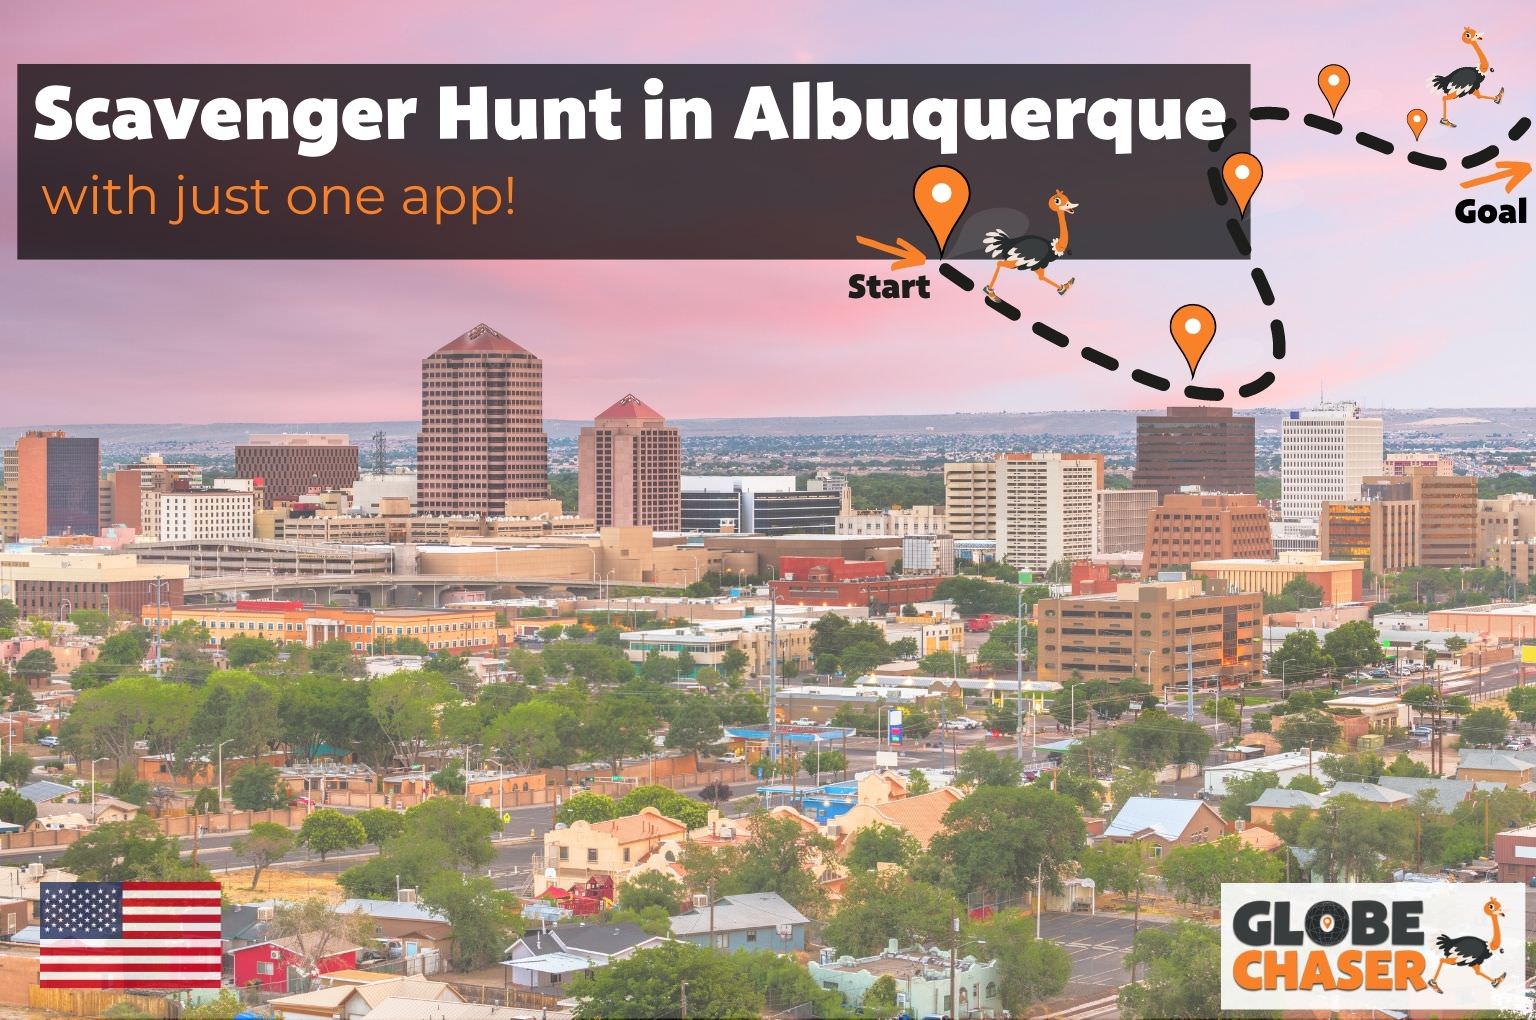 Scavenger Hunt in Albuquerque, USA - Family Activities with the Globe Chaser App for Outdoor Fun